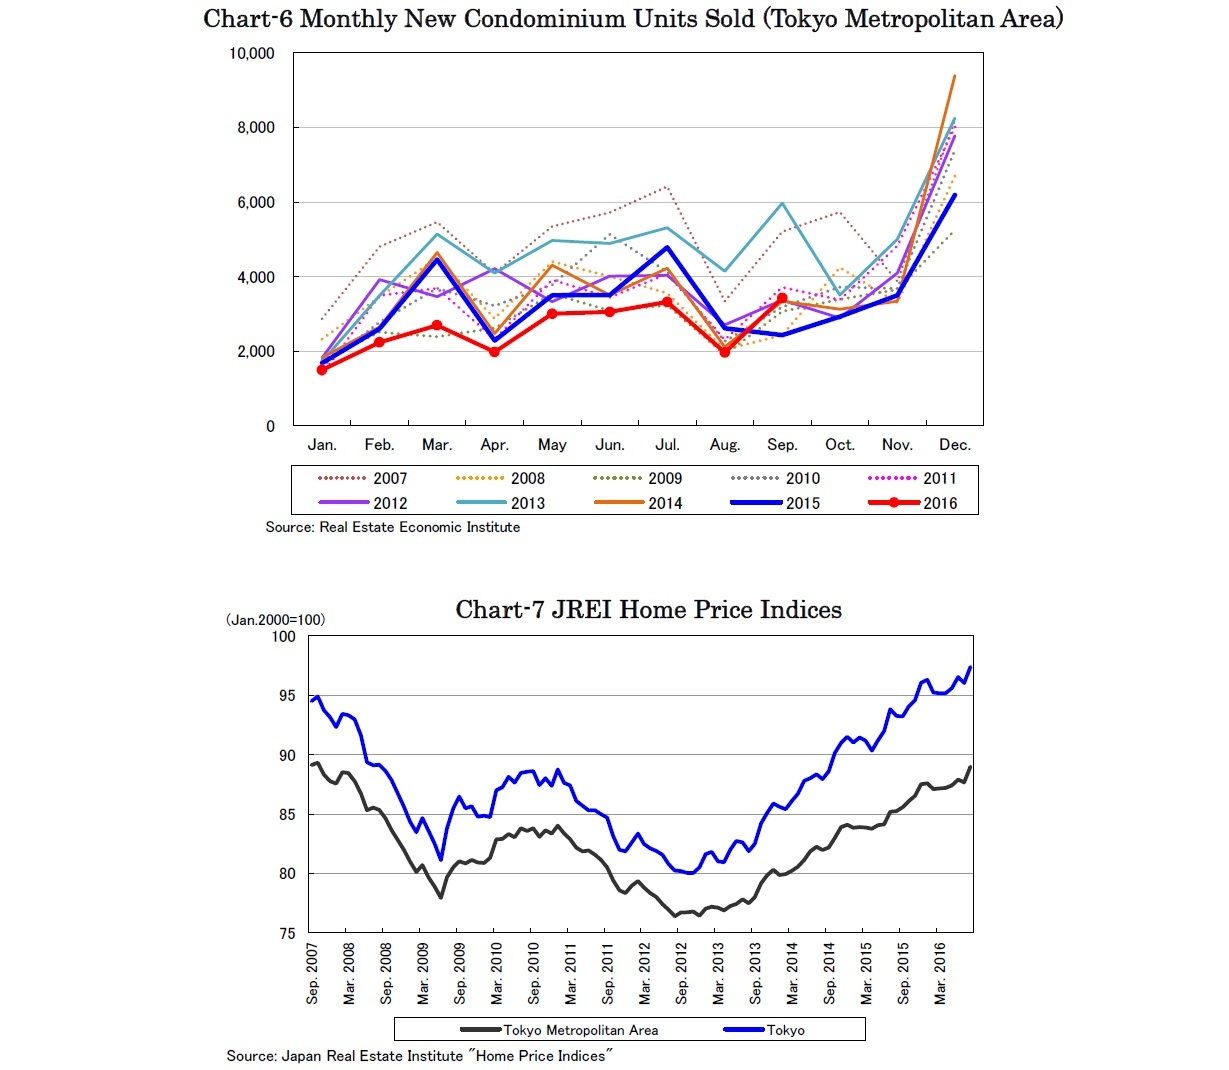 Chart-6 Monthly New Condominium Units Sold (Tokyo Metropolitan Area)/Chart-7 JREI Home Price Indices